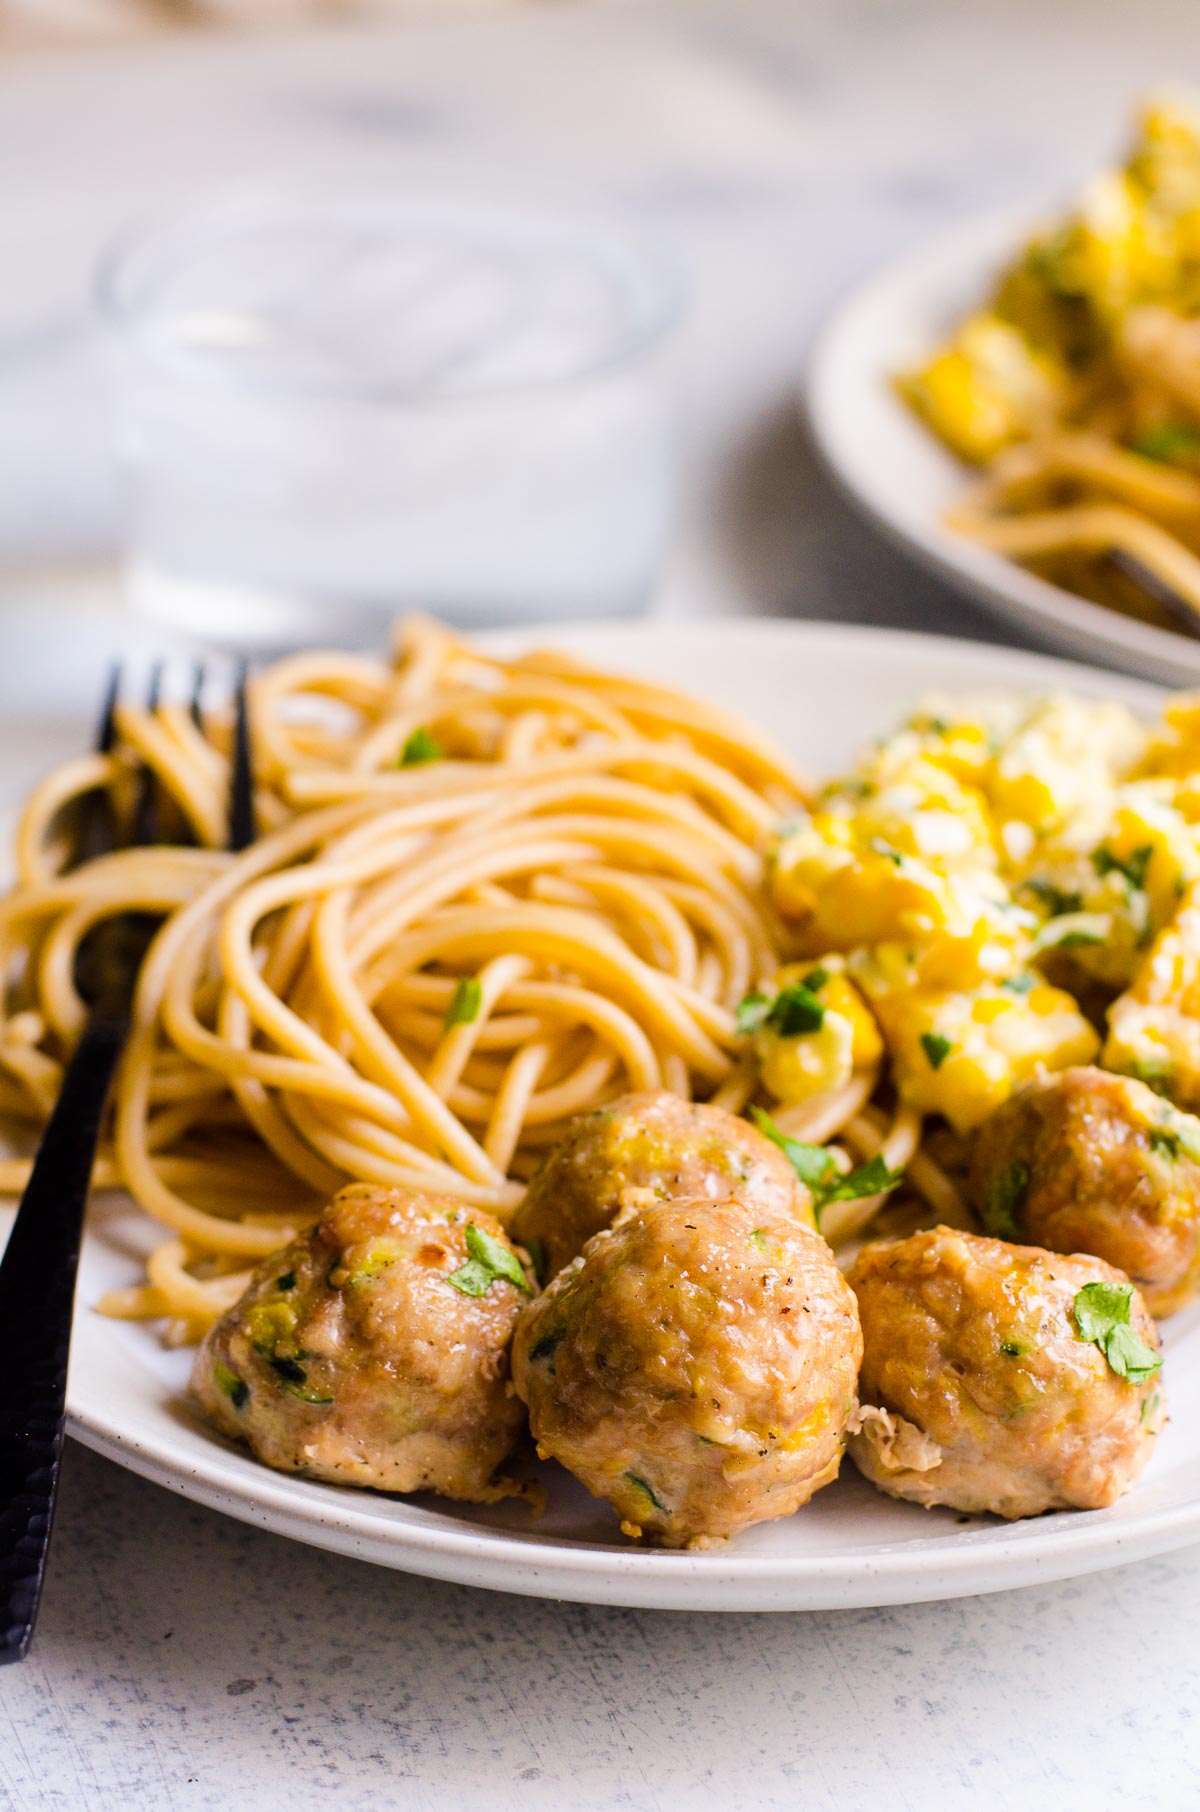 turkey balls with spaghetti noodles and corn on a plate for serving healthy dinner